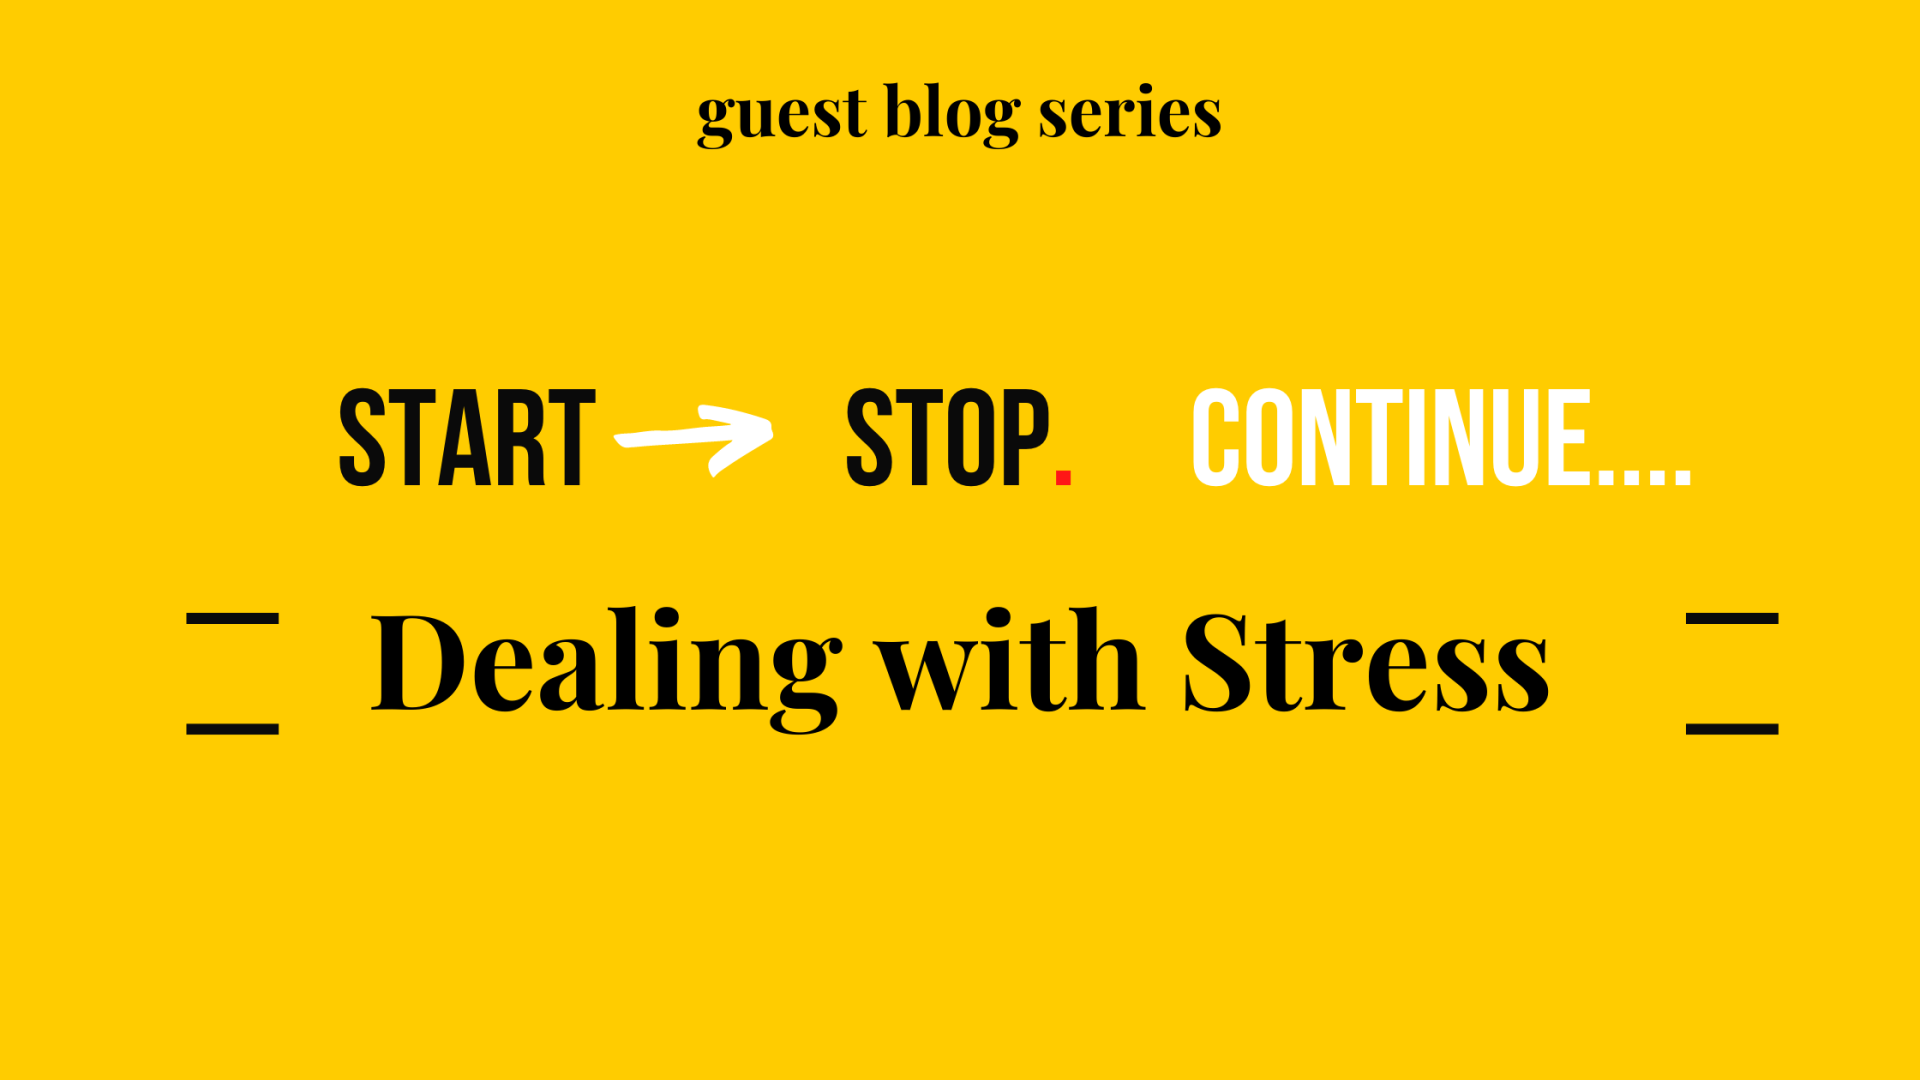 Tips on dealing with stress